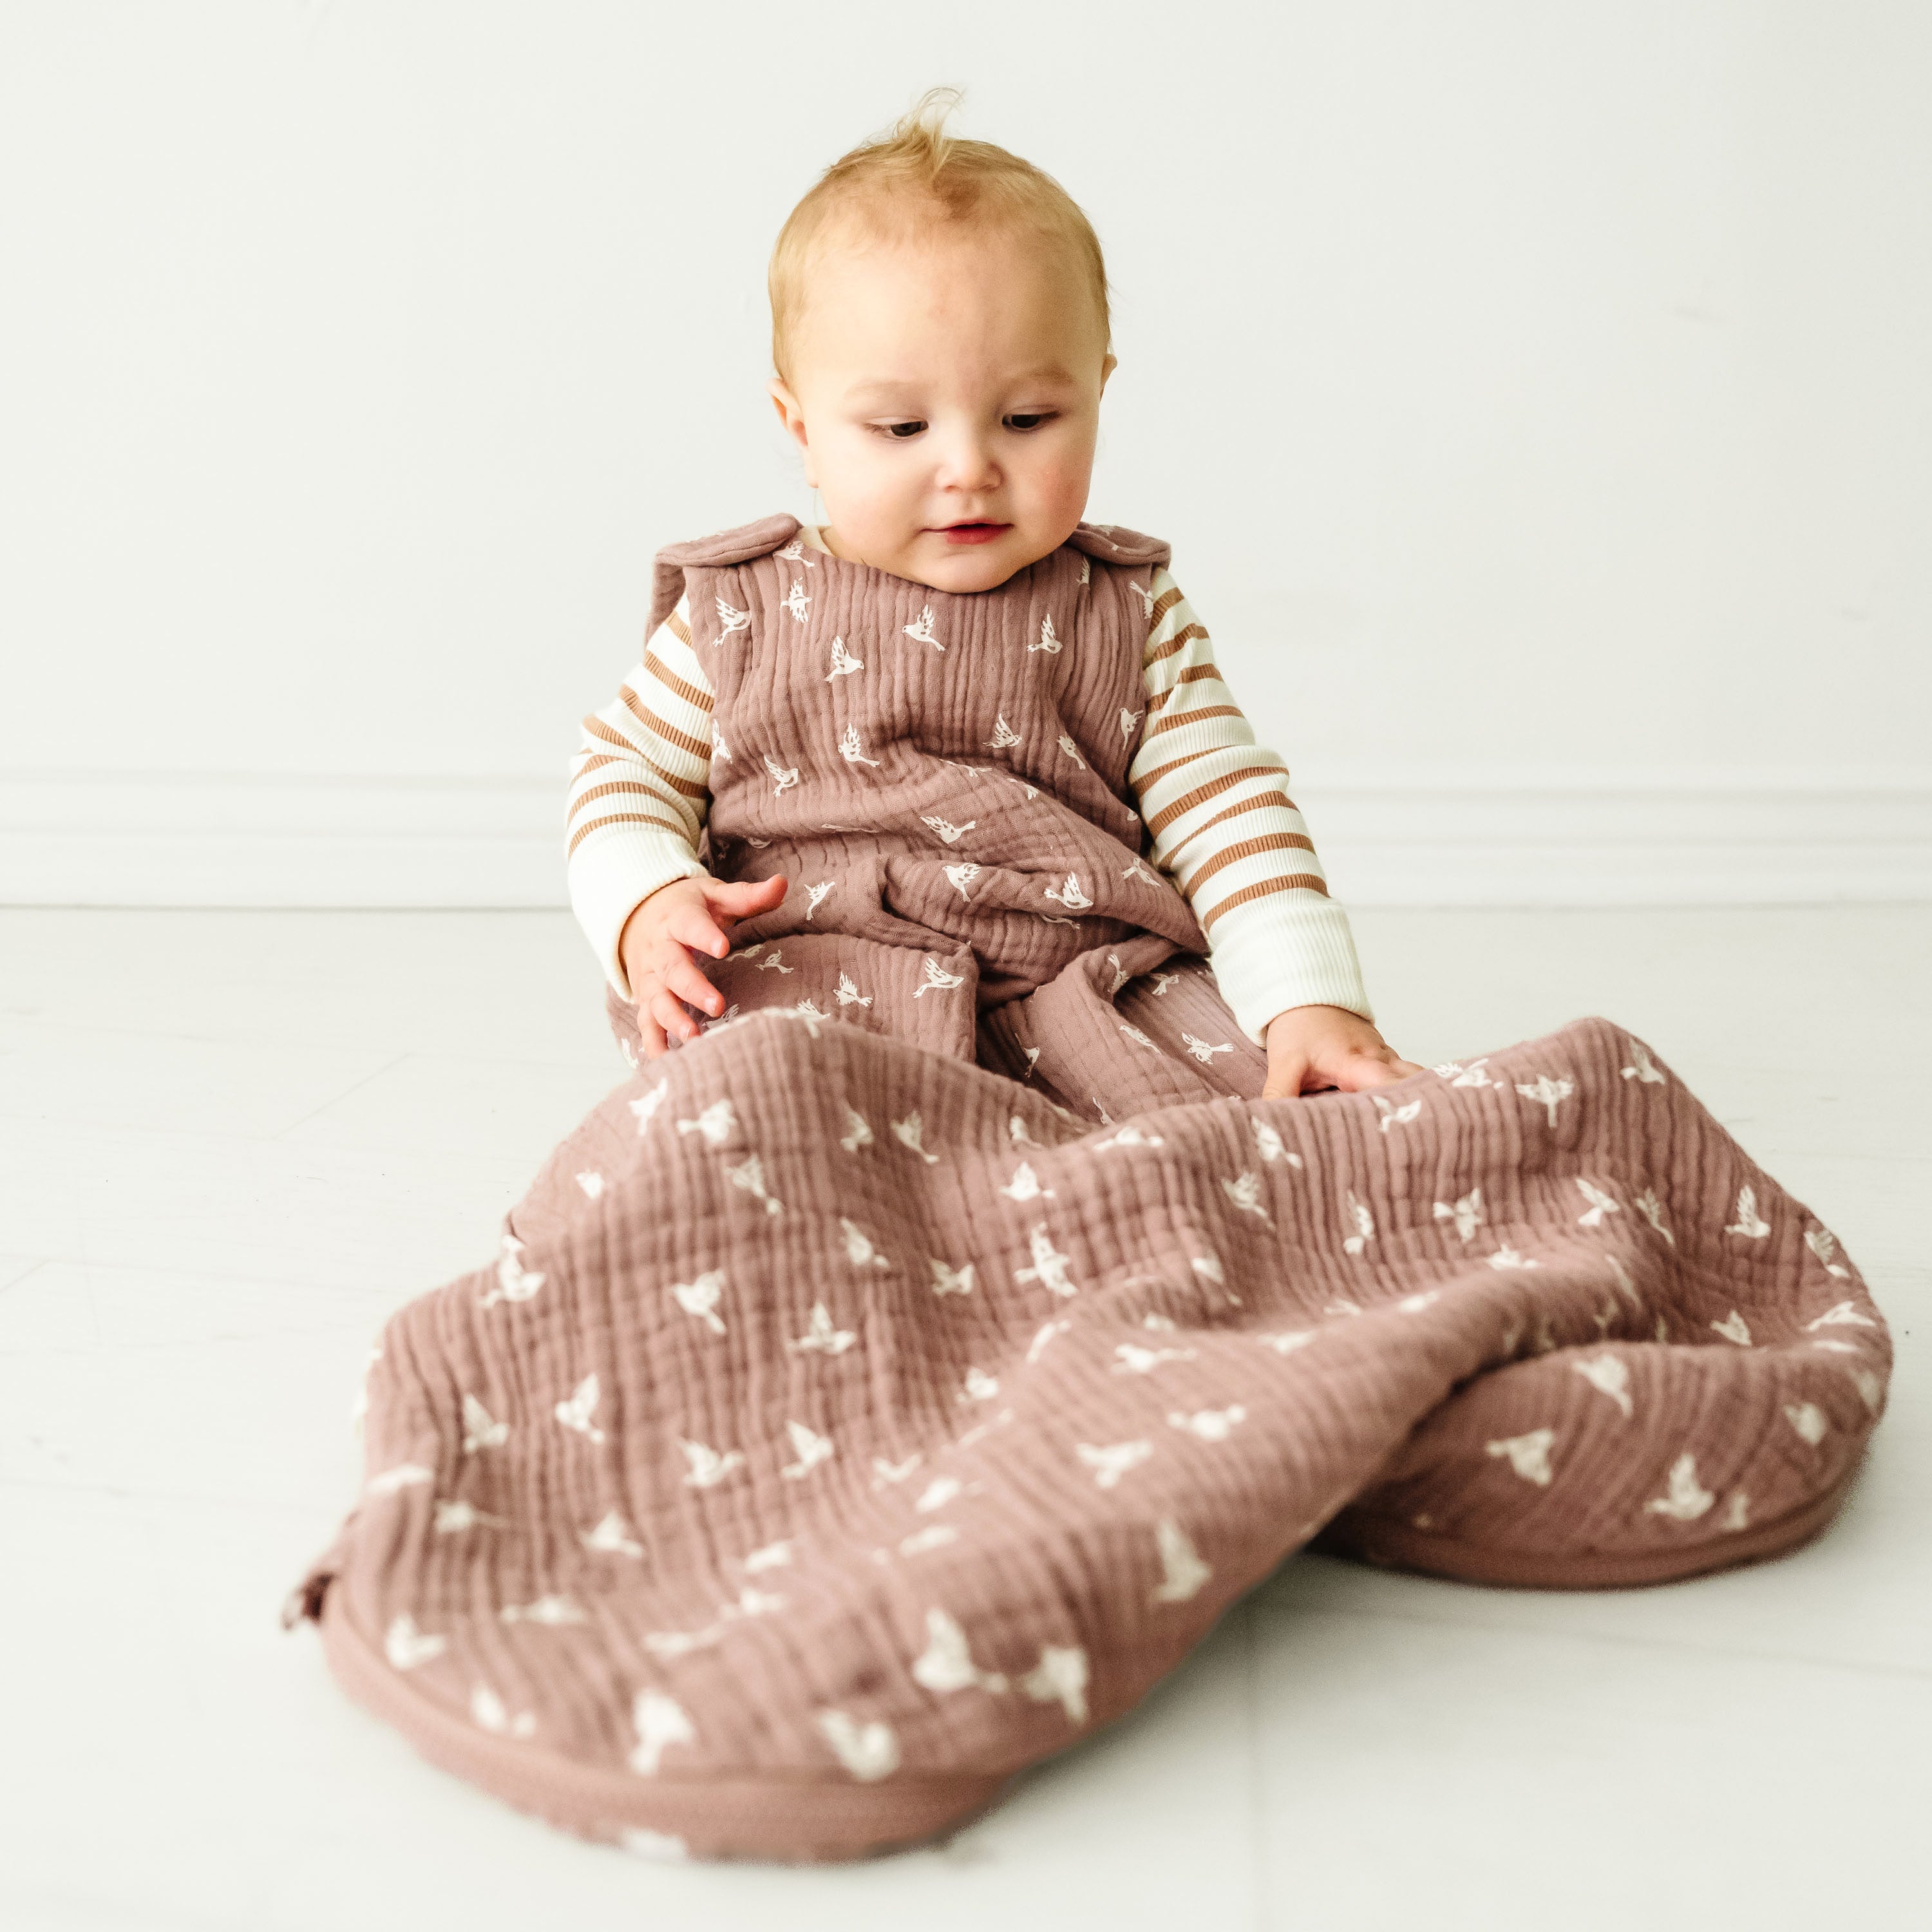 A toddler with light hair sits on a white floor, wearing a striped long-sleeve shirt and a puffy sleeveless jumper, holding a Makemake Organics Muslin Wearable Blanket - Flock with a geometric pattern.